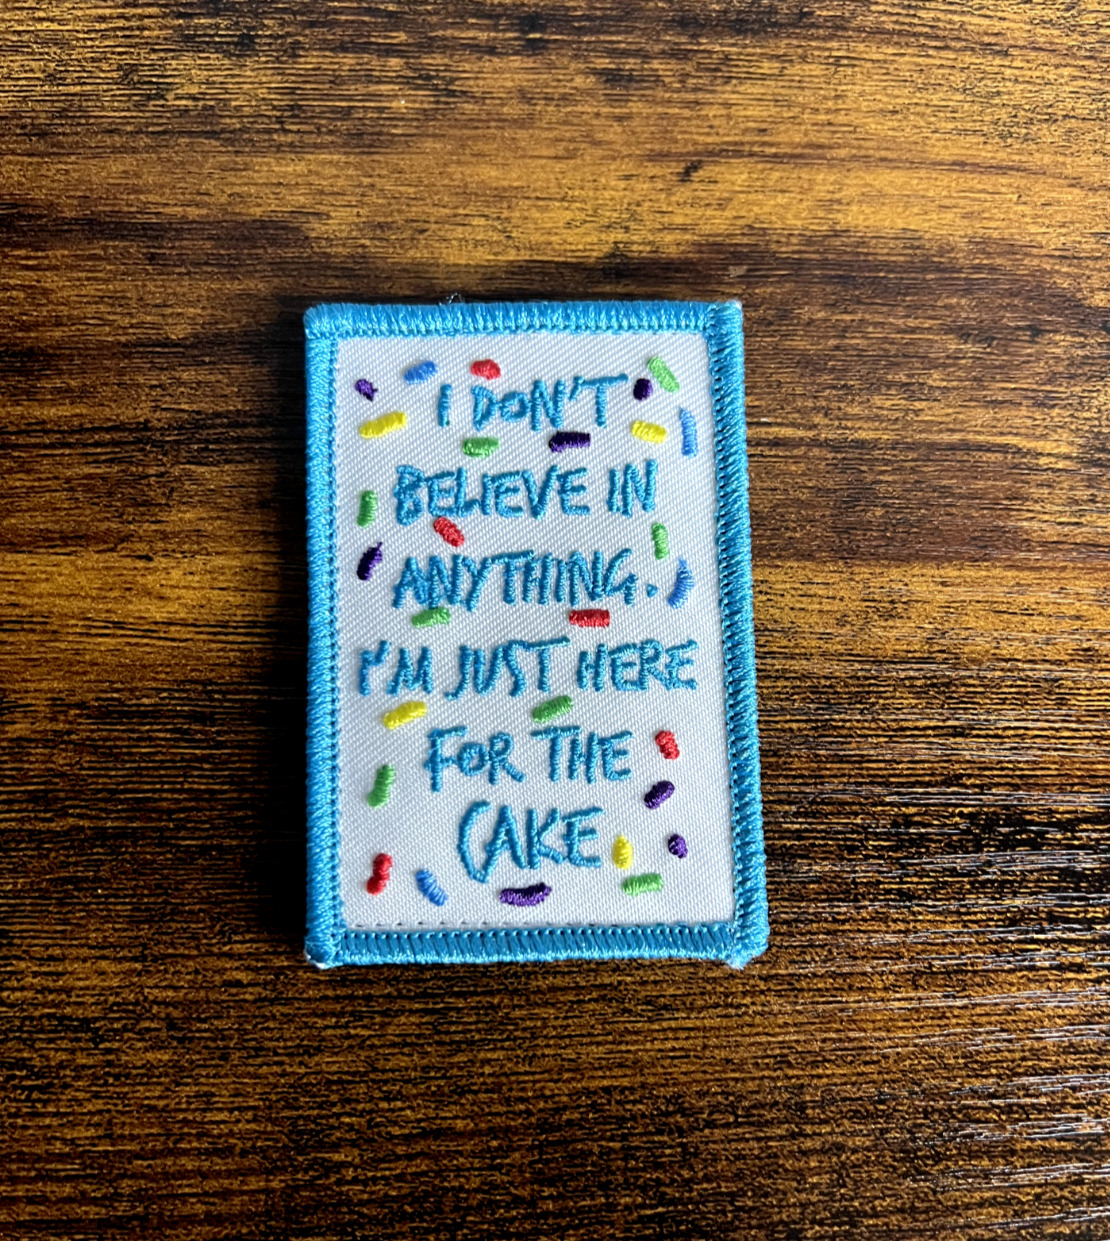 I Dont Believe In Anything Just Here For Cake Morale Patch EDC Tad PDW Sprinkles